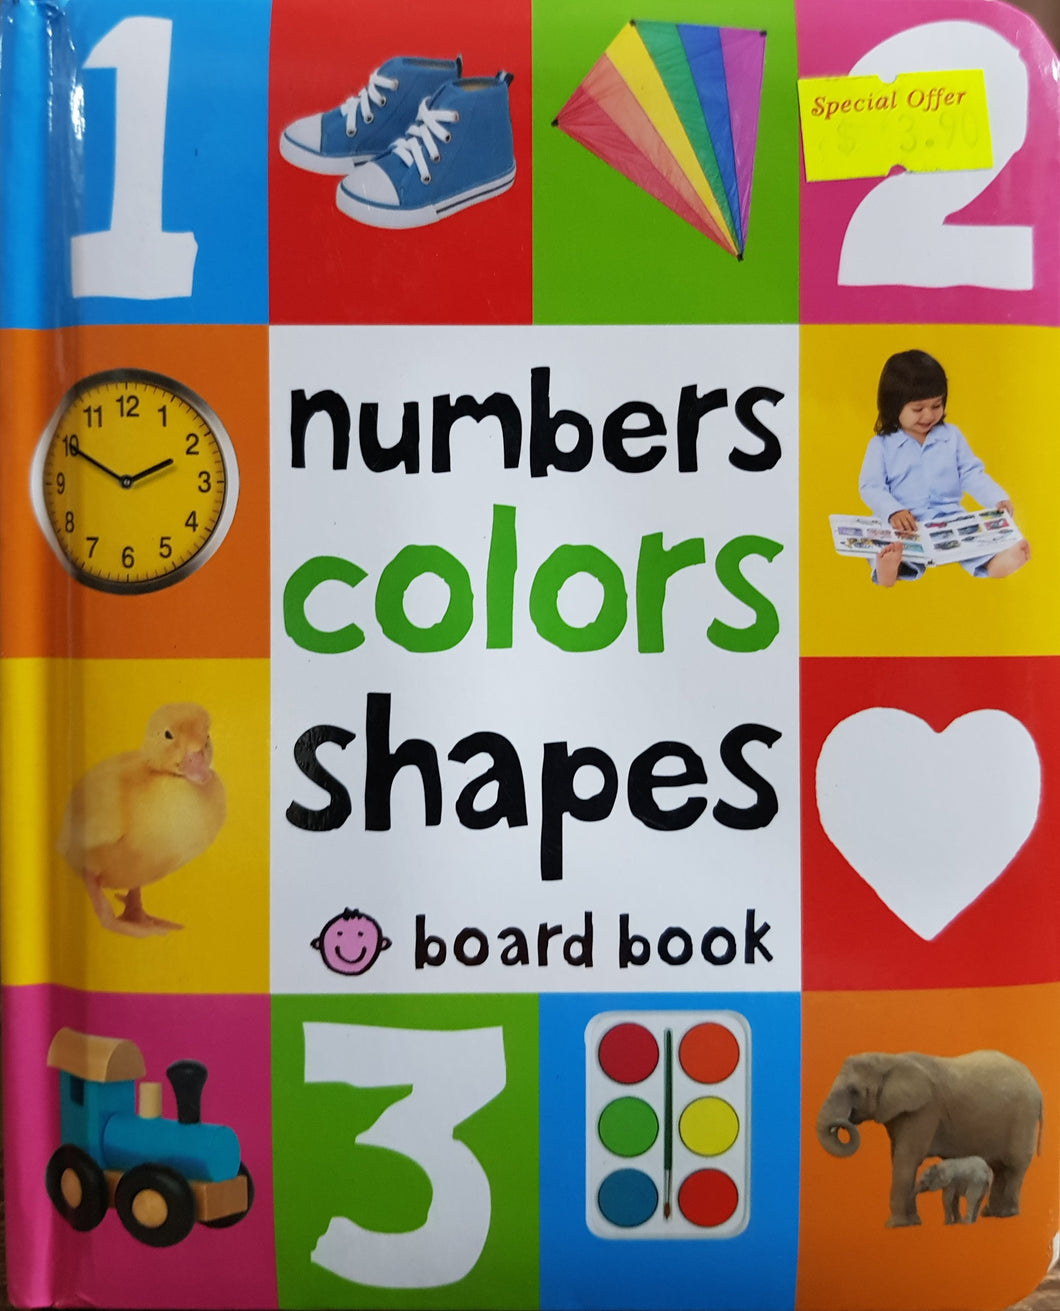 Numbers, Colors, Shapes - St. Martin